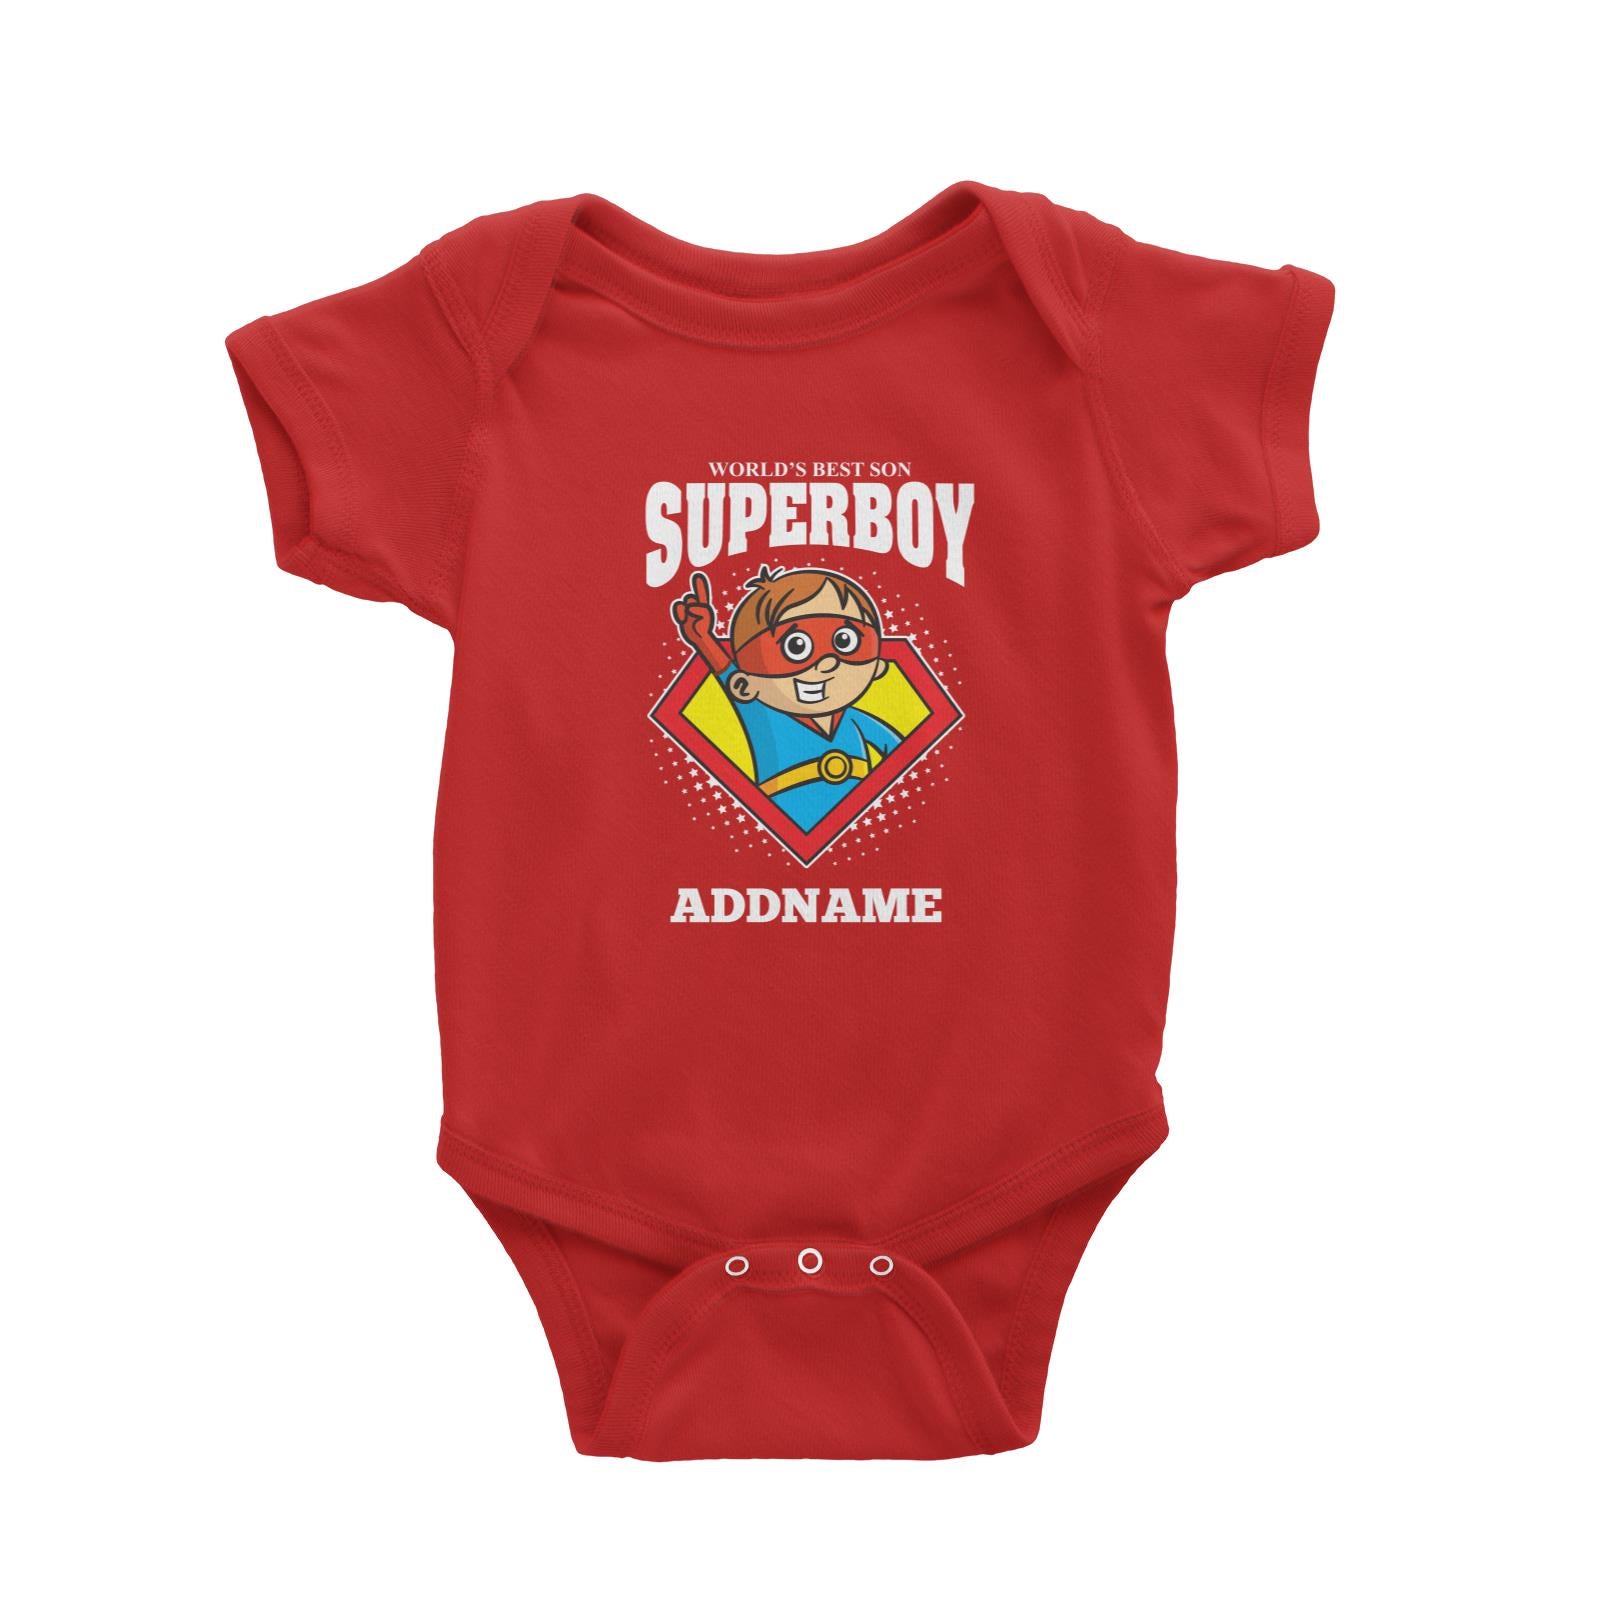 Best Son Superboy Boy Baby Romper Personalizable Designs Matching Family Superhero Family Edition Superhero